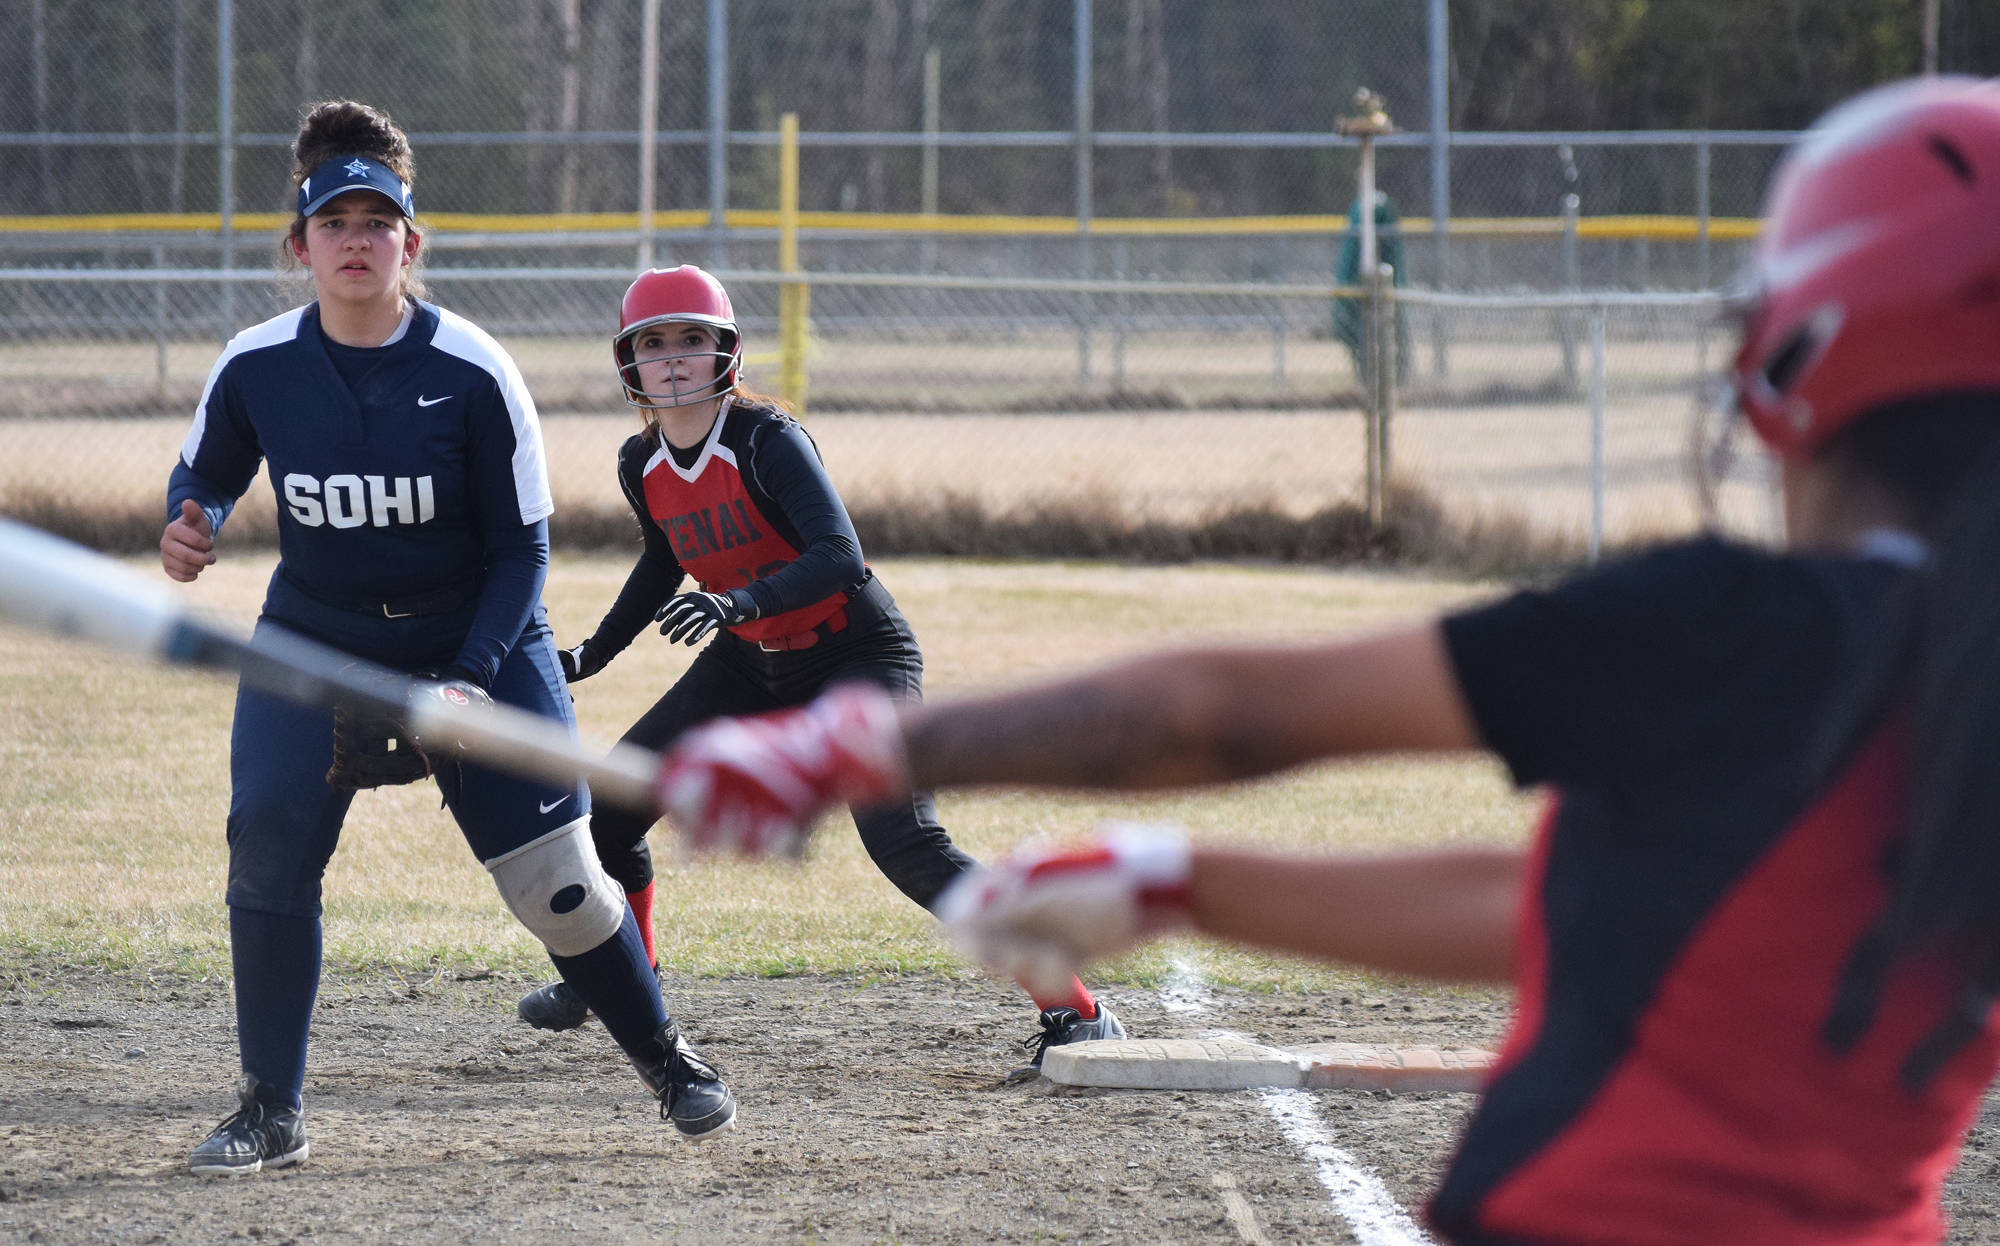 Kenai’s Alyssa Stanton and Soldotna first baseman Bailey Smith watch as Lexy Carrasco takes a swing Friday in a Northern Lights Conference contest at the Soldotna softball fields. (Photo by Joey Klecka/Peninsula Clarion)